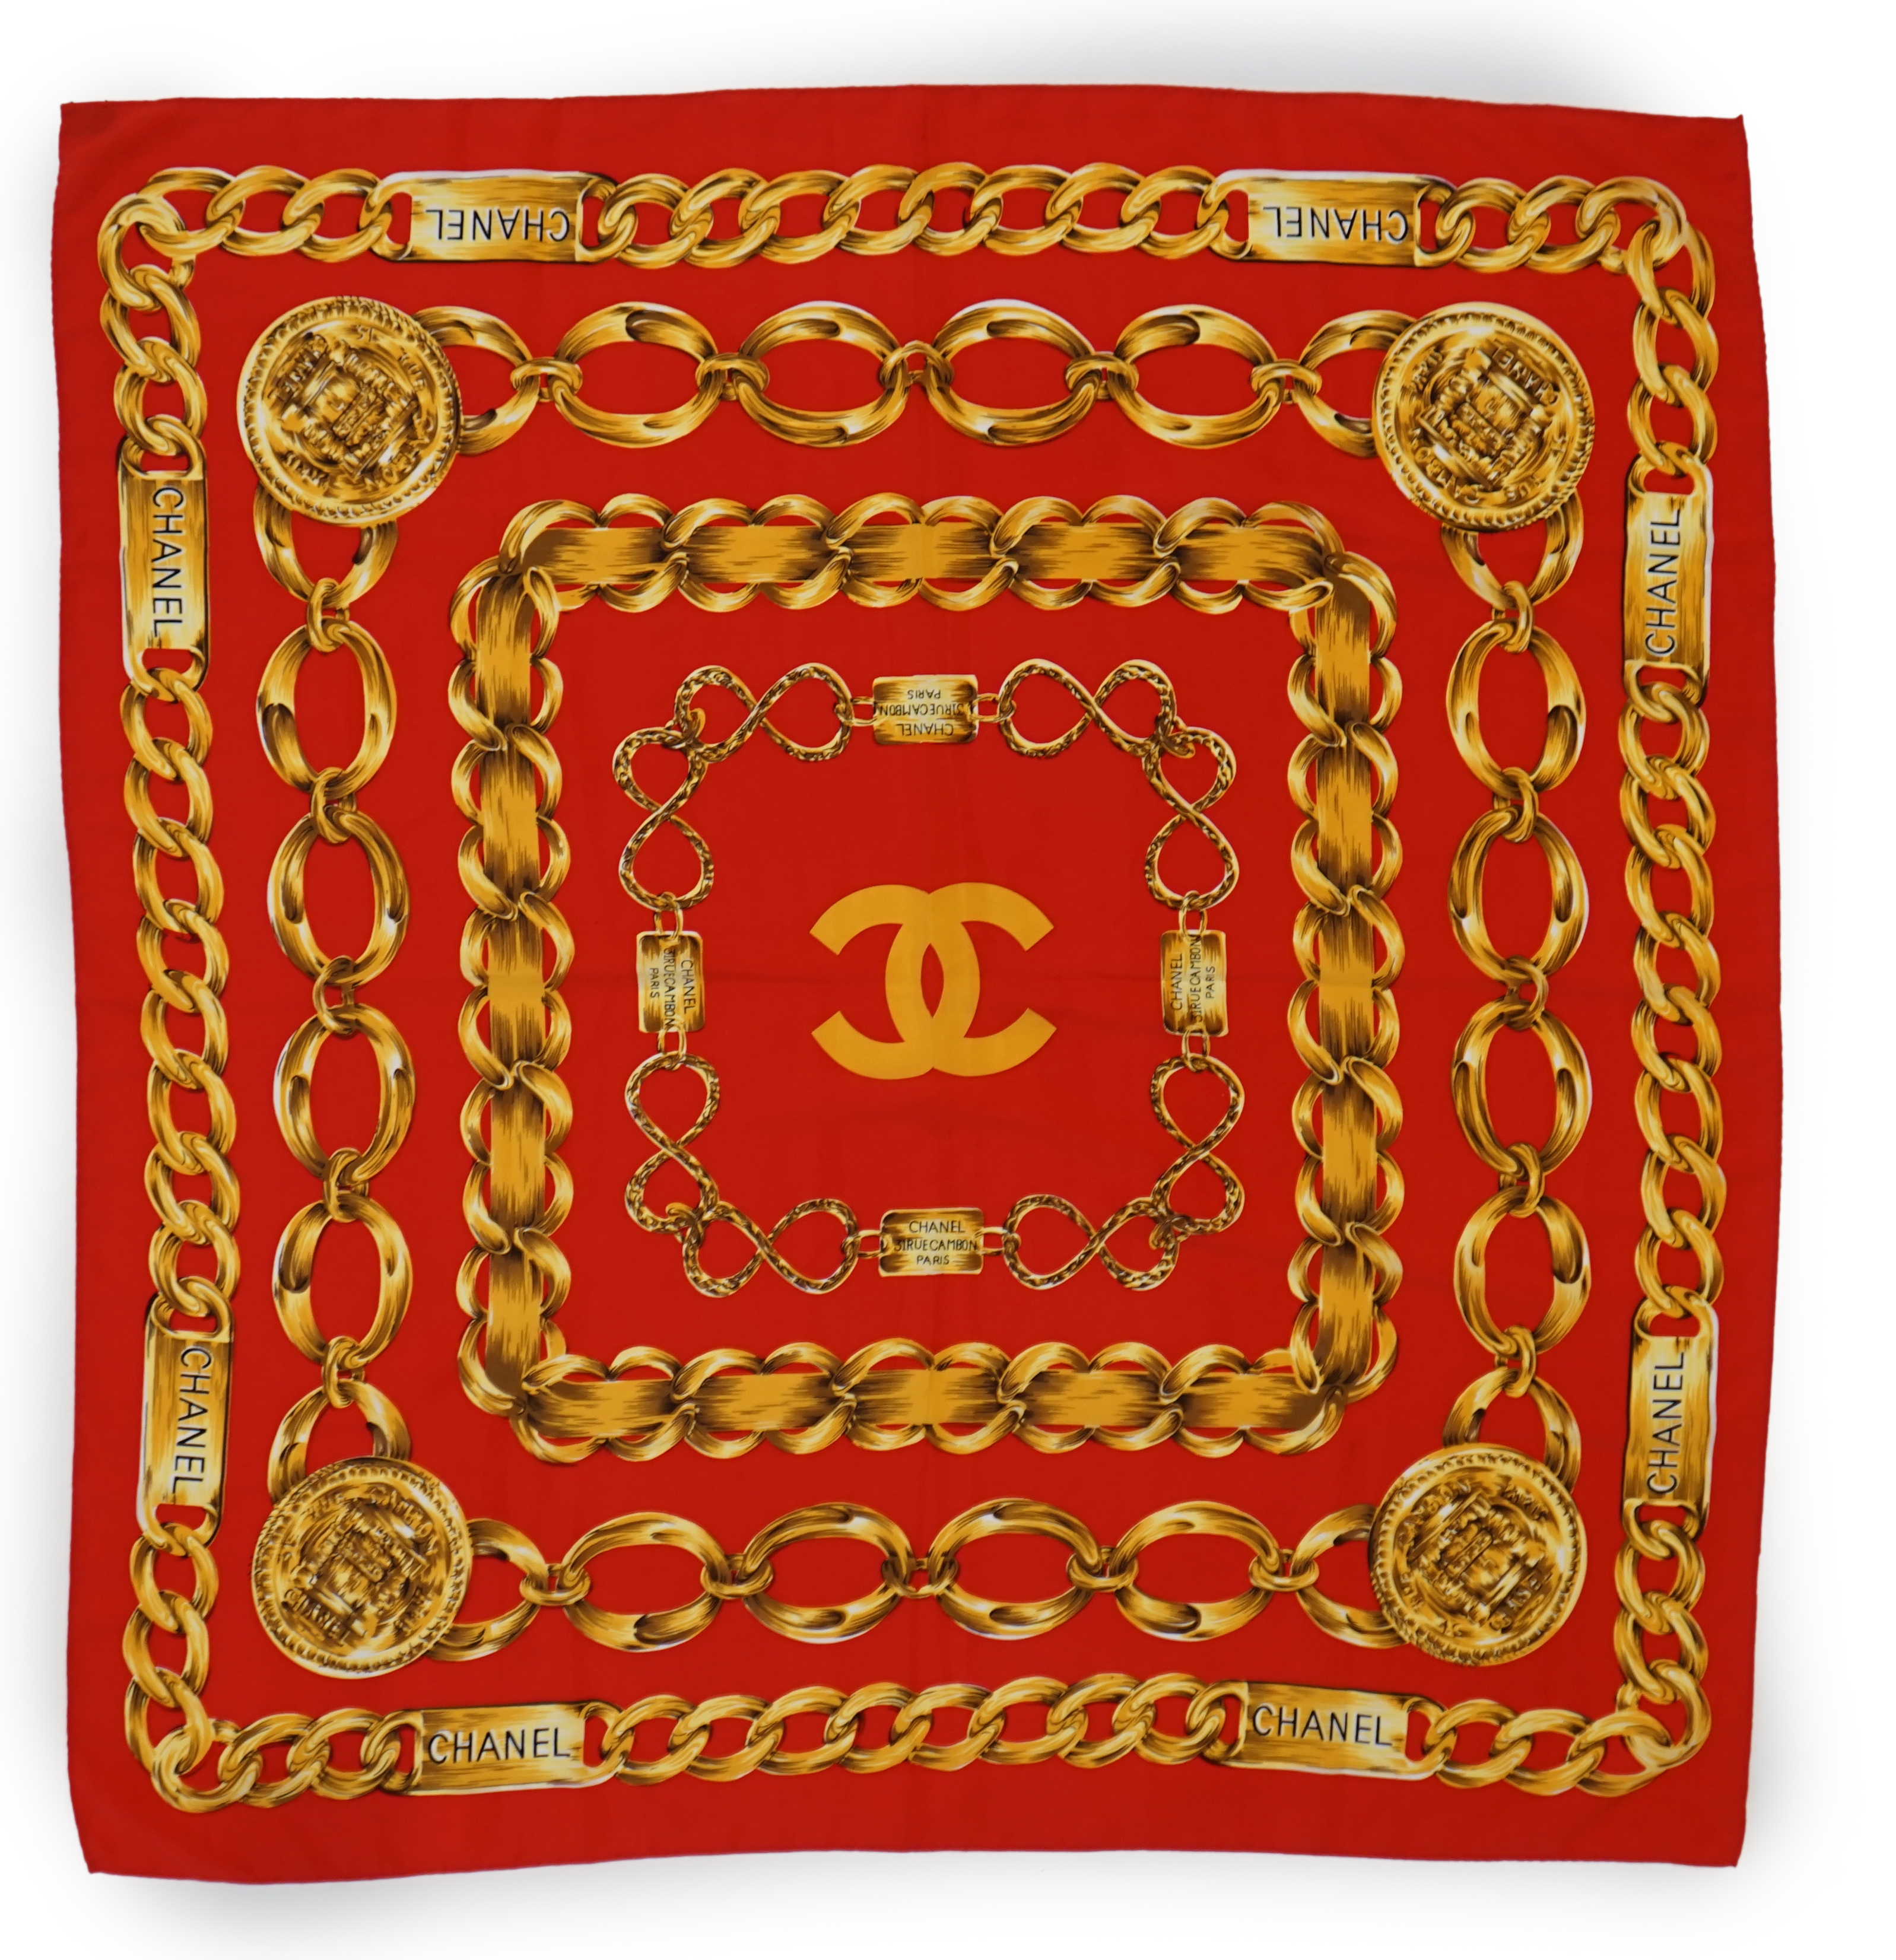 A Chanel Red Chain large silk scarf, 80cm x 80cm